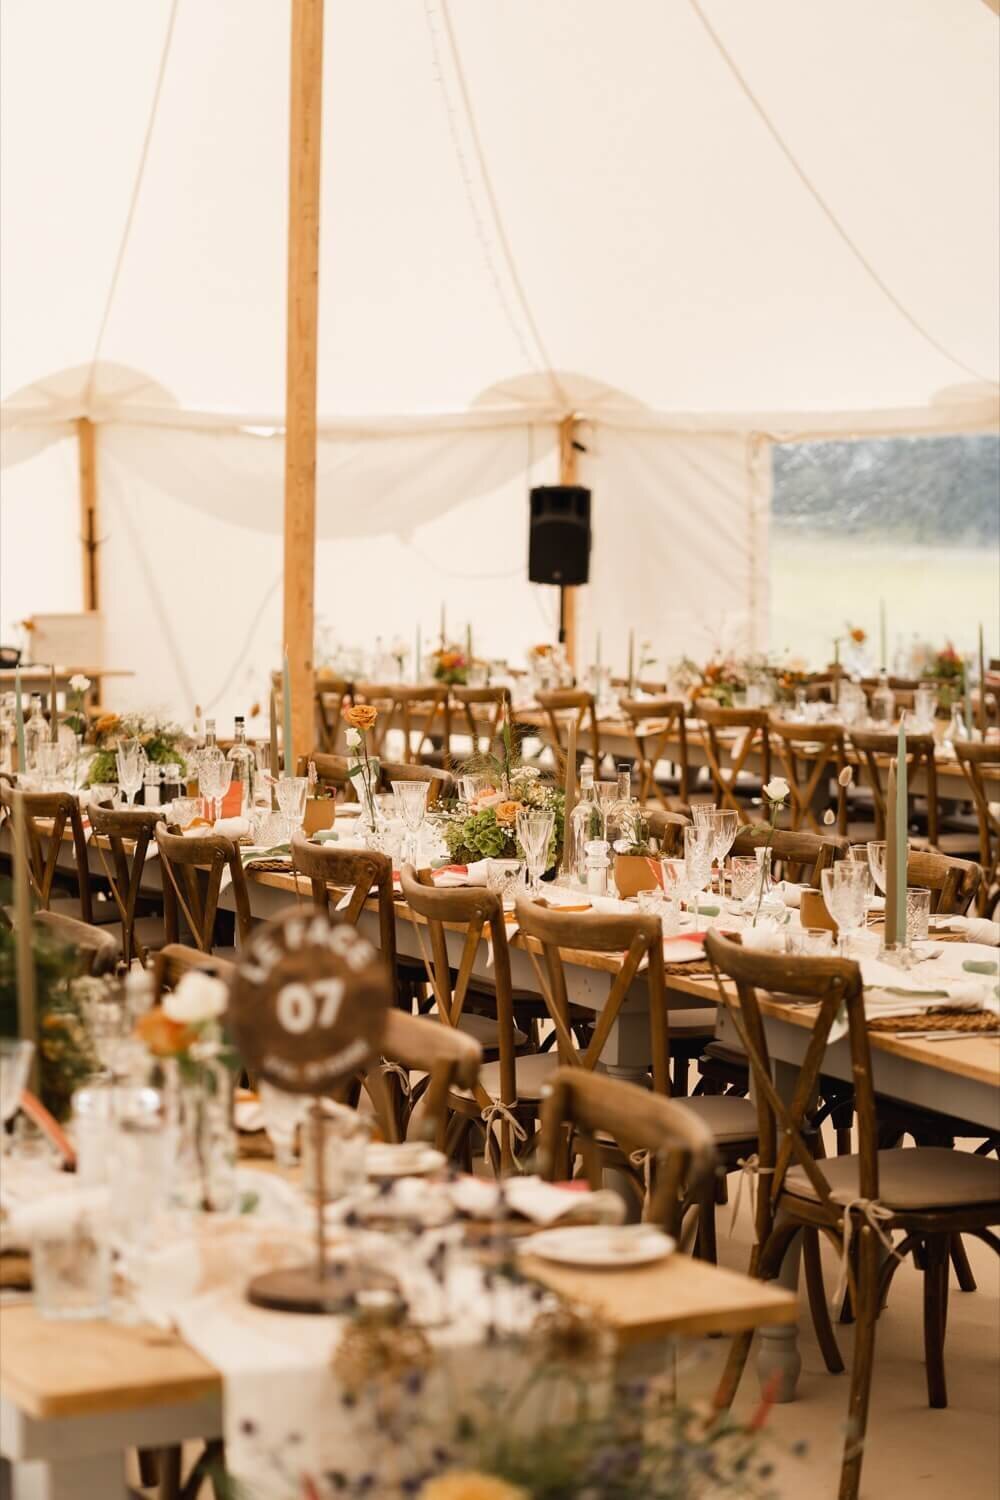 A beautiful rustic wedding breakfast set up with long tables inside of a pole marquee